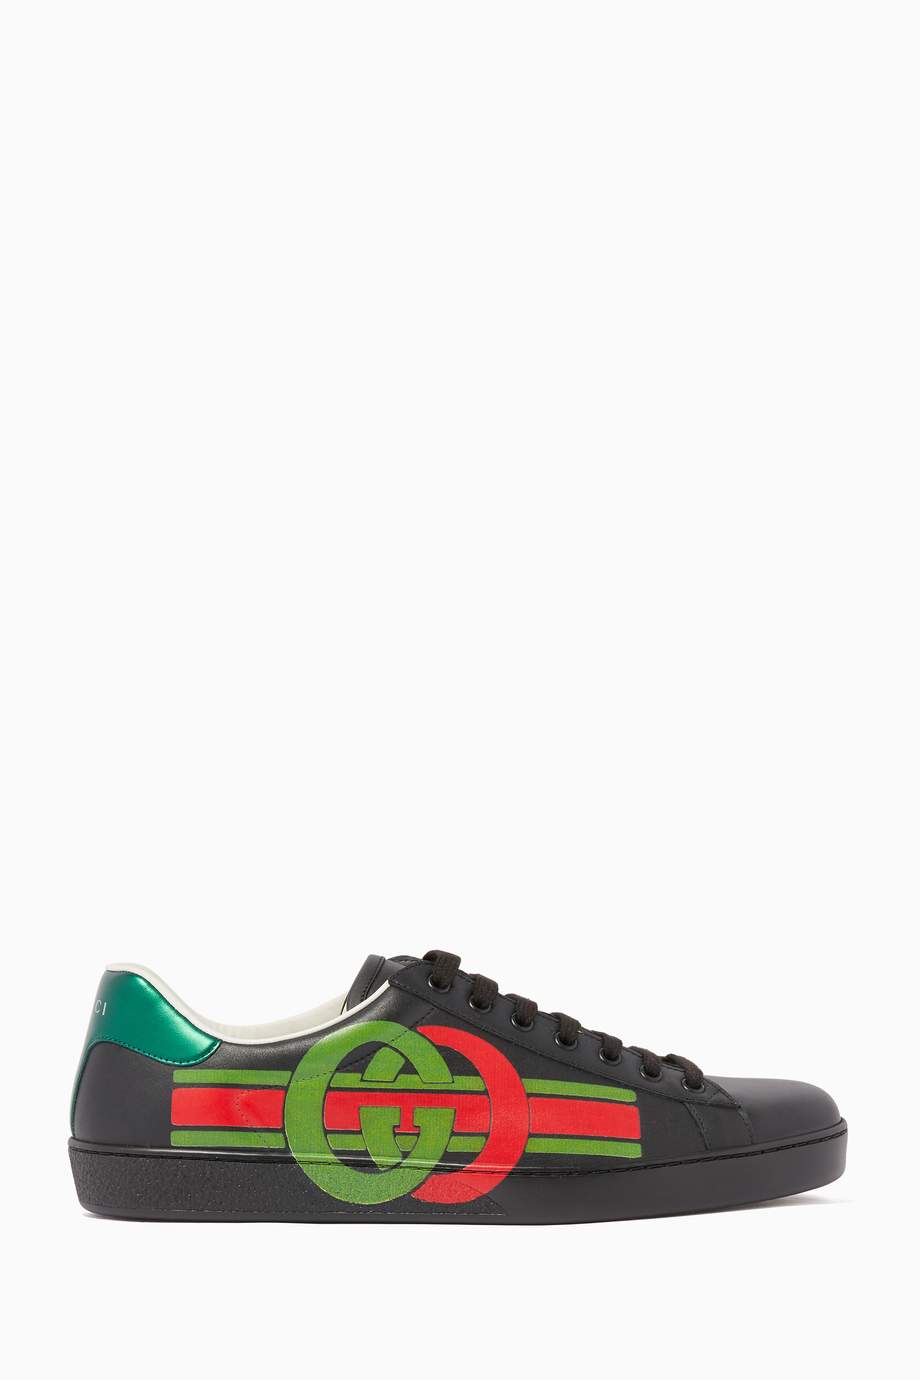 Shop Gucci Black Ace Interlocking G Leather Sneakers for Men | Ounass UAE